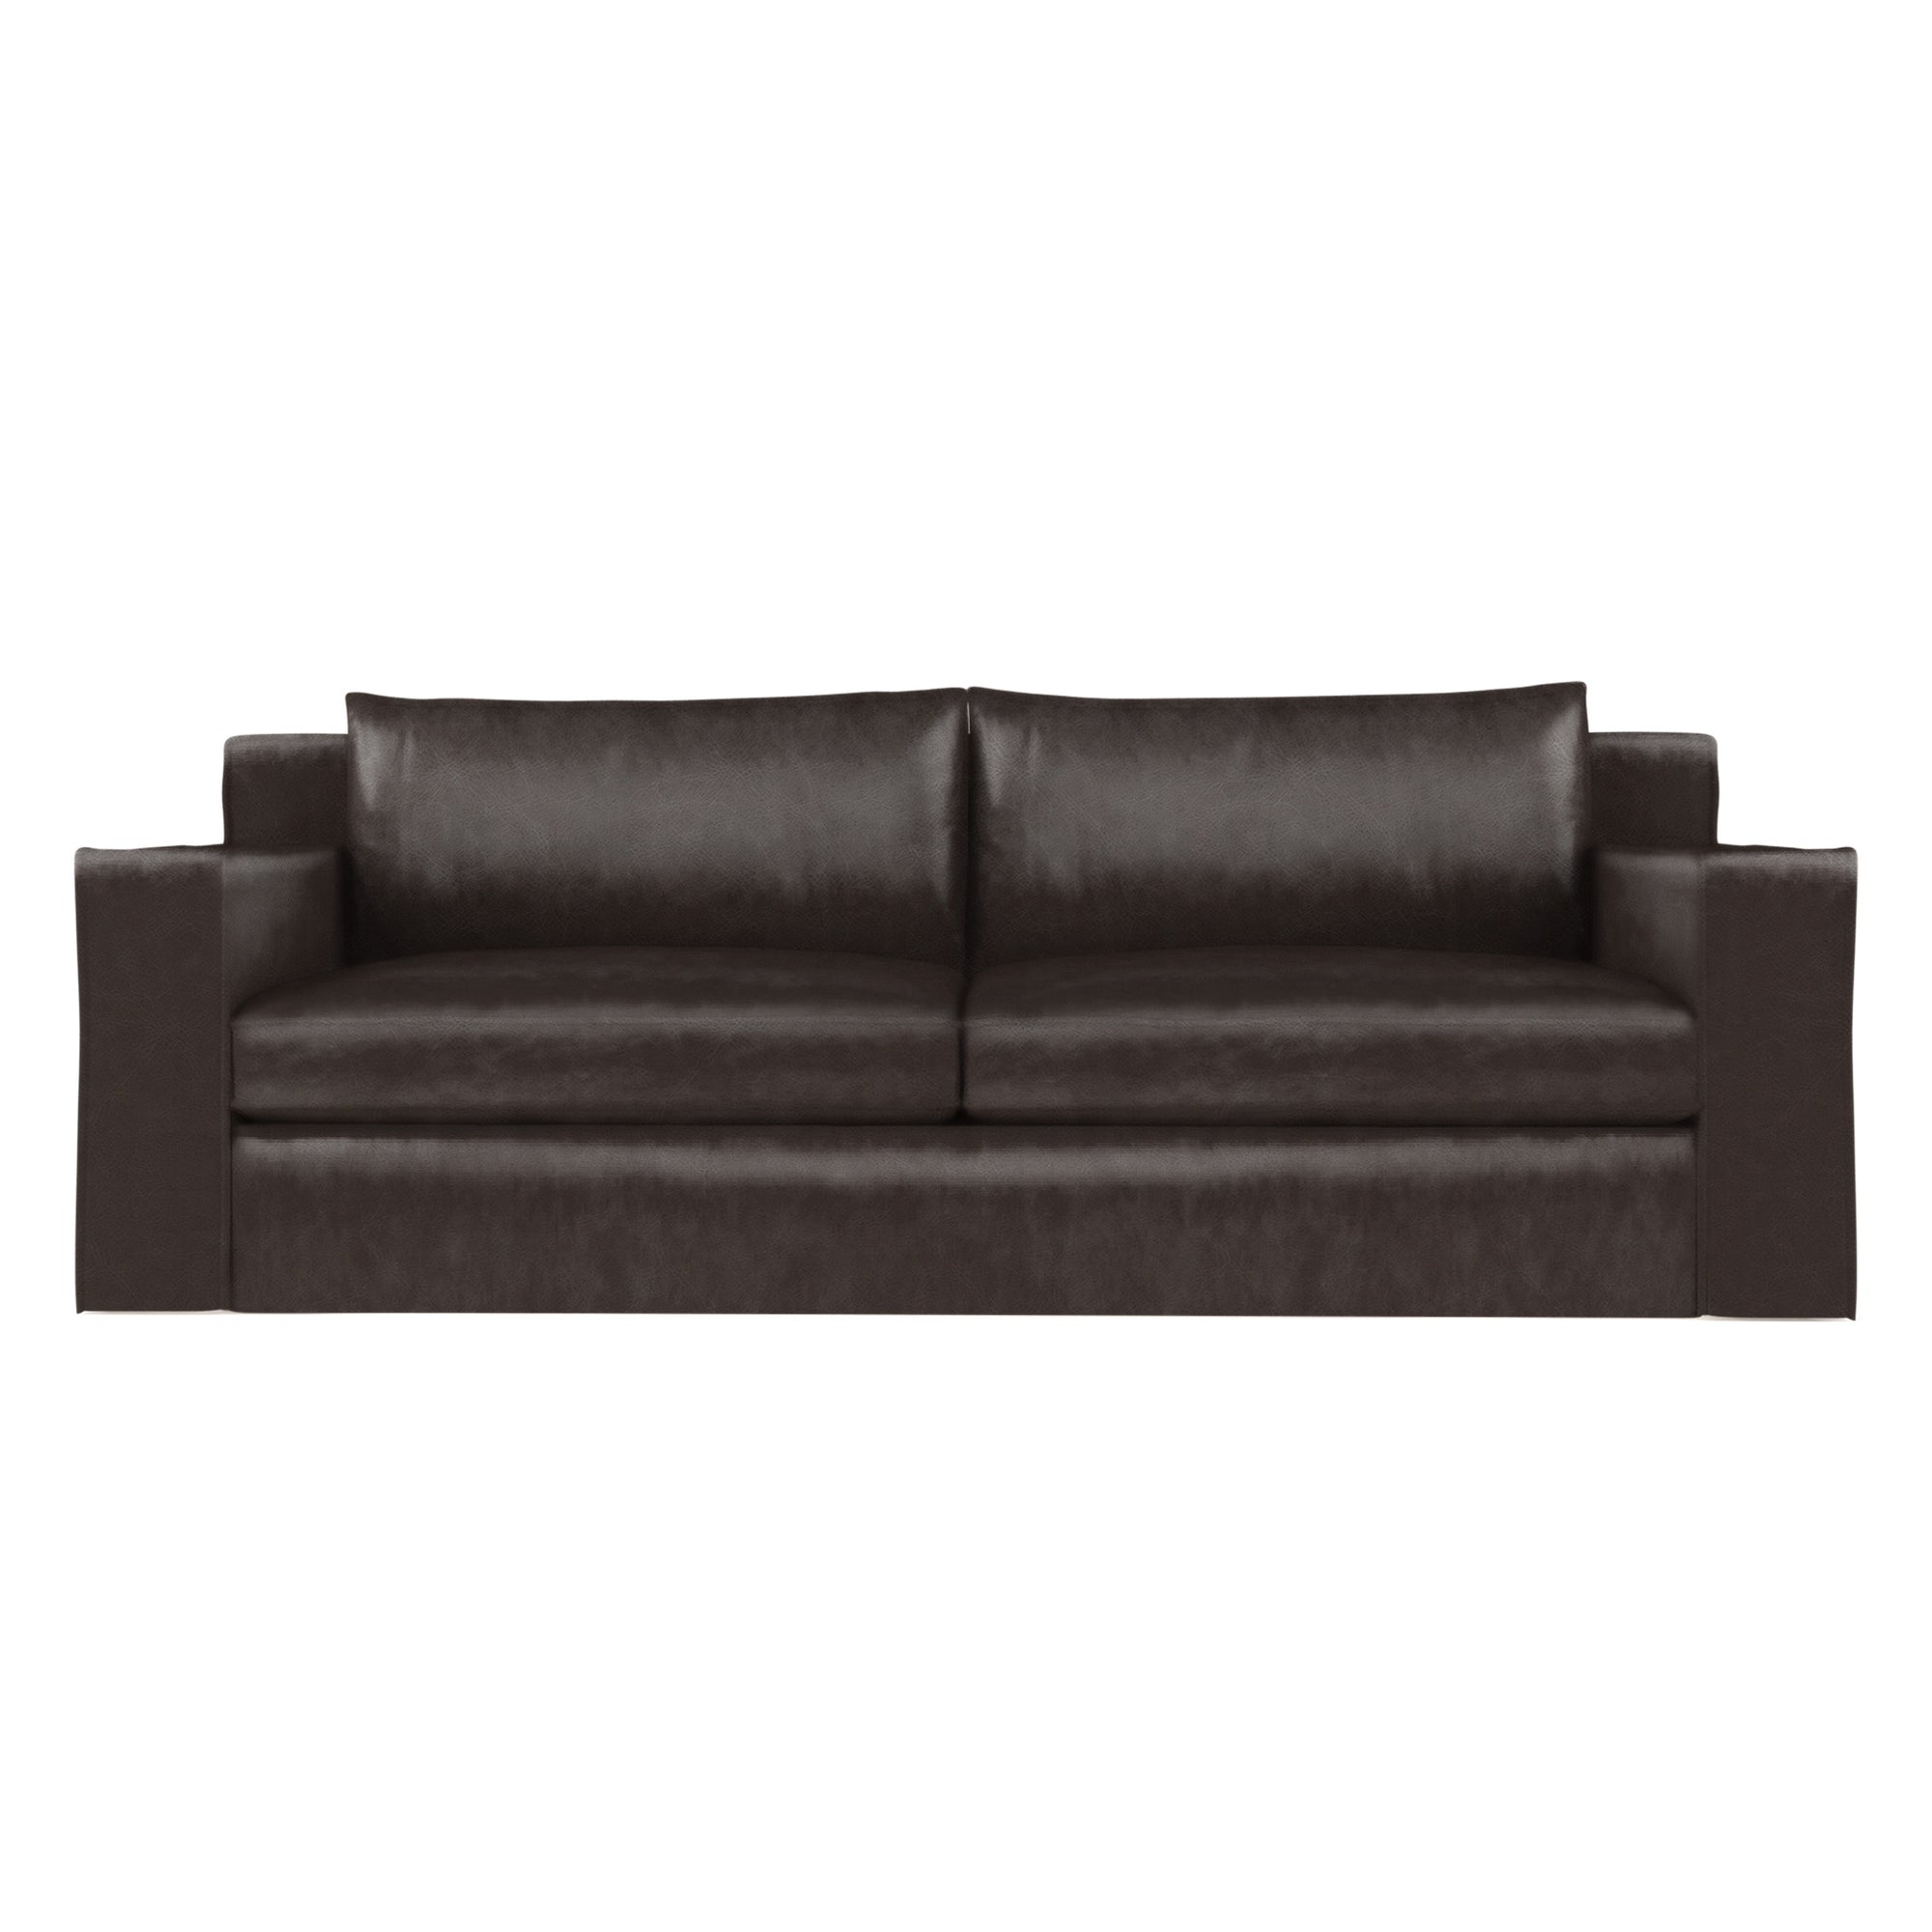 Mulberry Sofa - Chocolate Vintage Leather